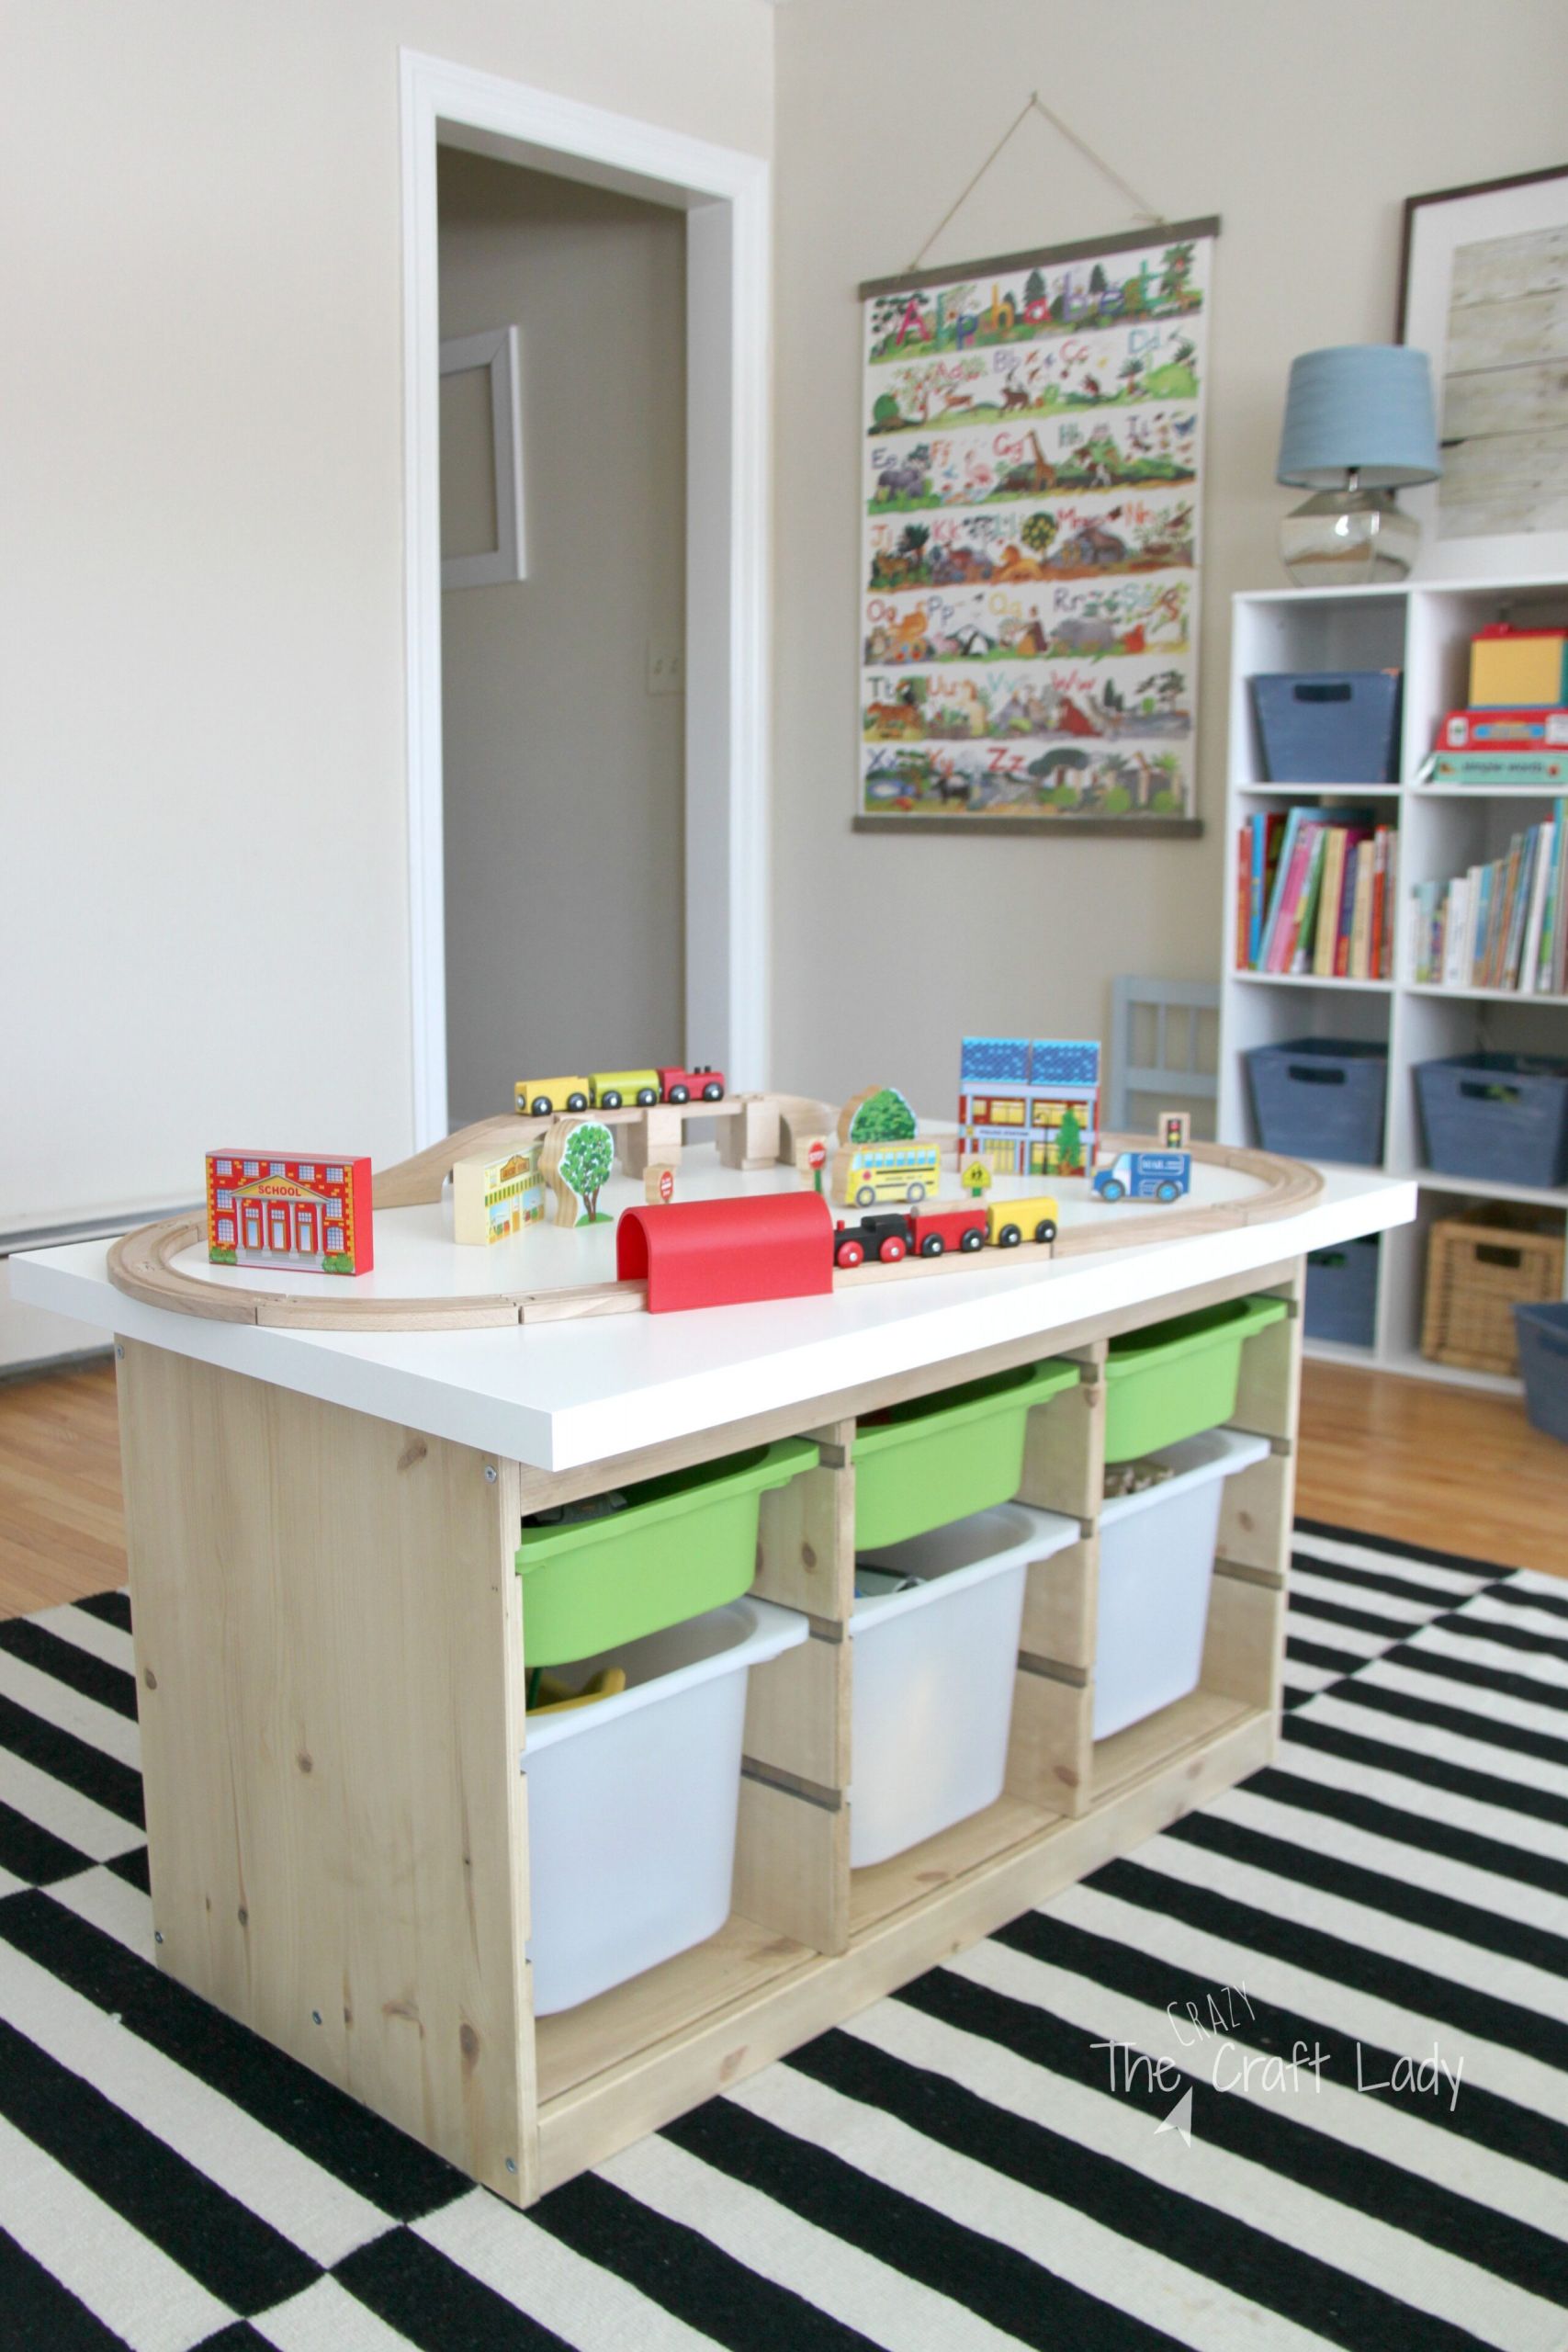 Ikea Kids Storage
 An Ikea Hack Train & Activity Table The Crazy Craft Lady